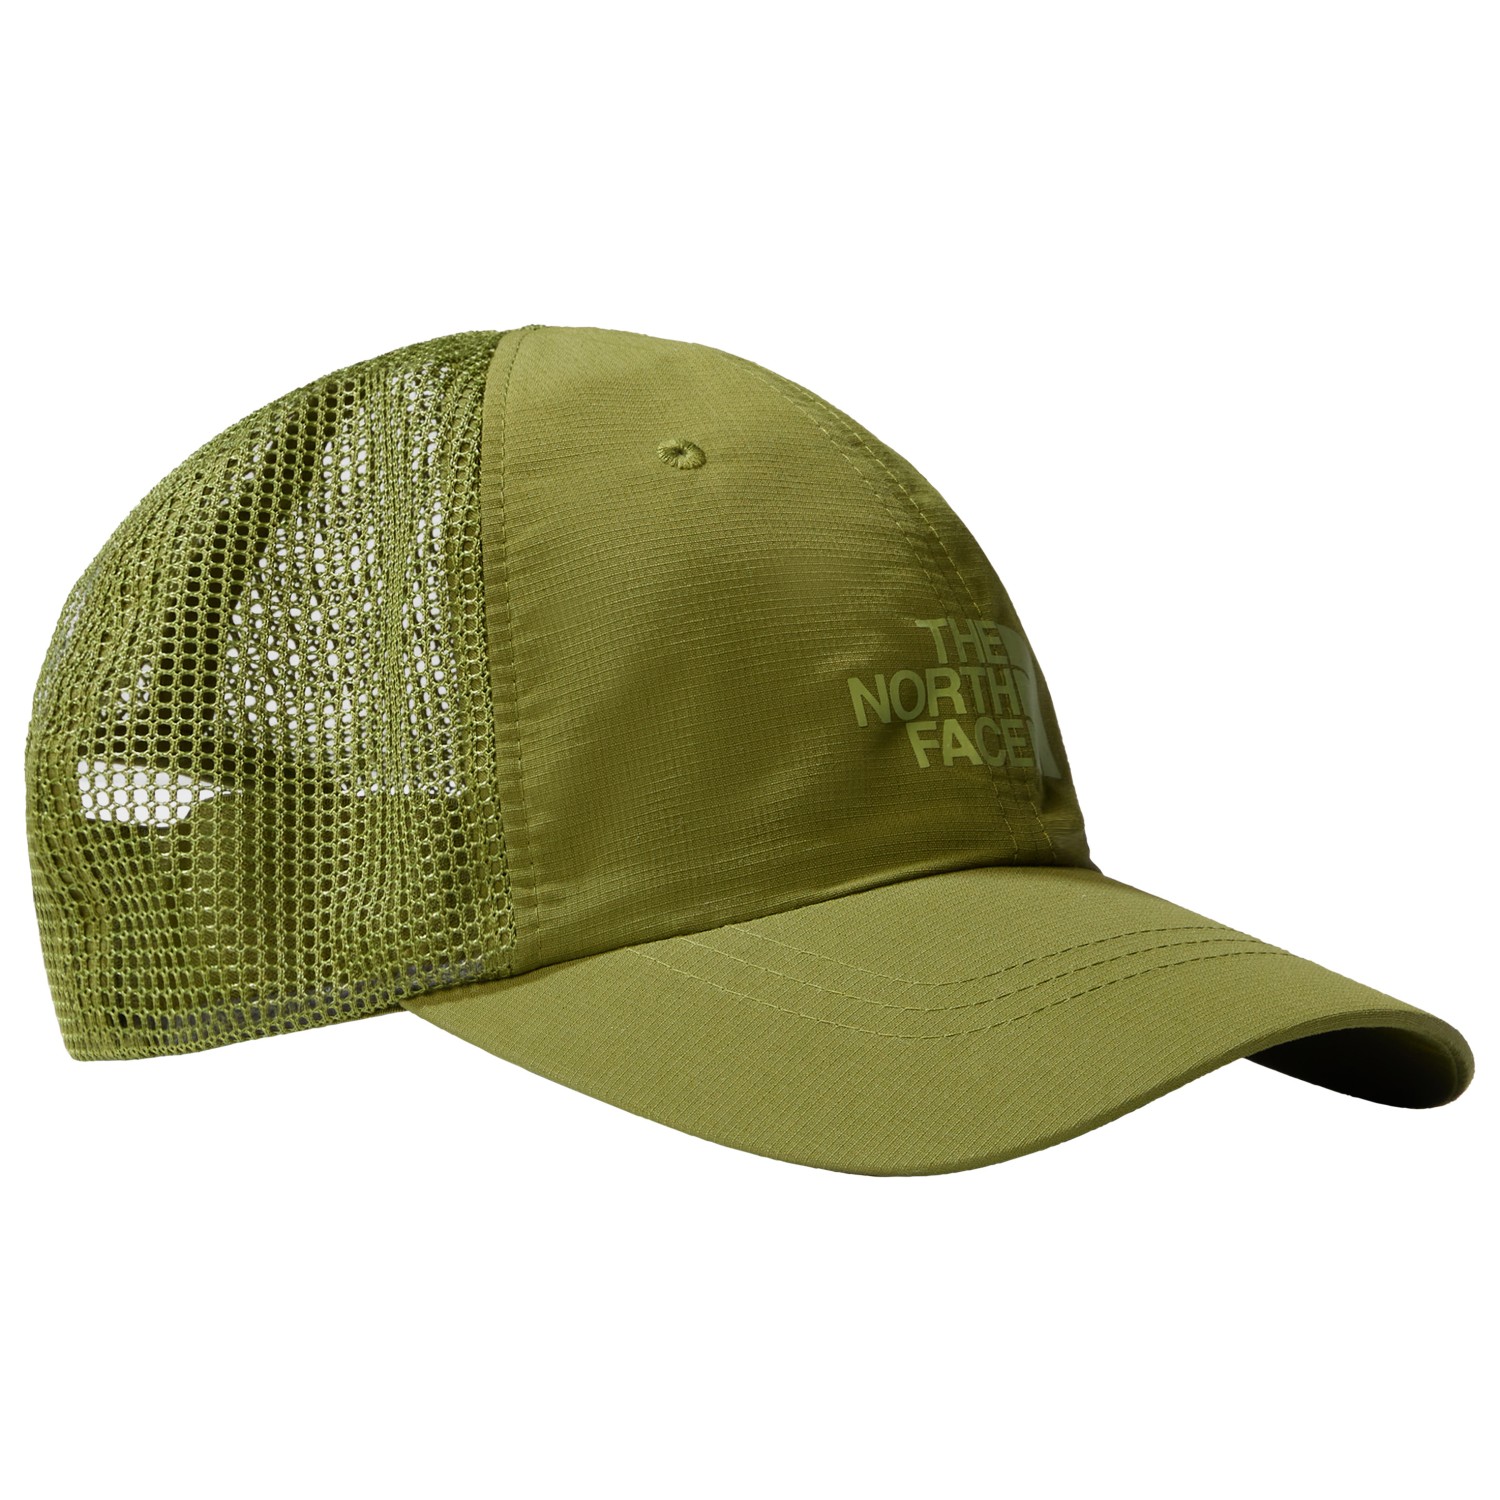 Кепка The North Face Horizon Trucker, цвет Forest Olive